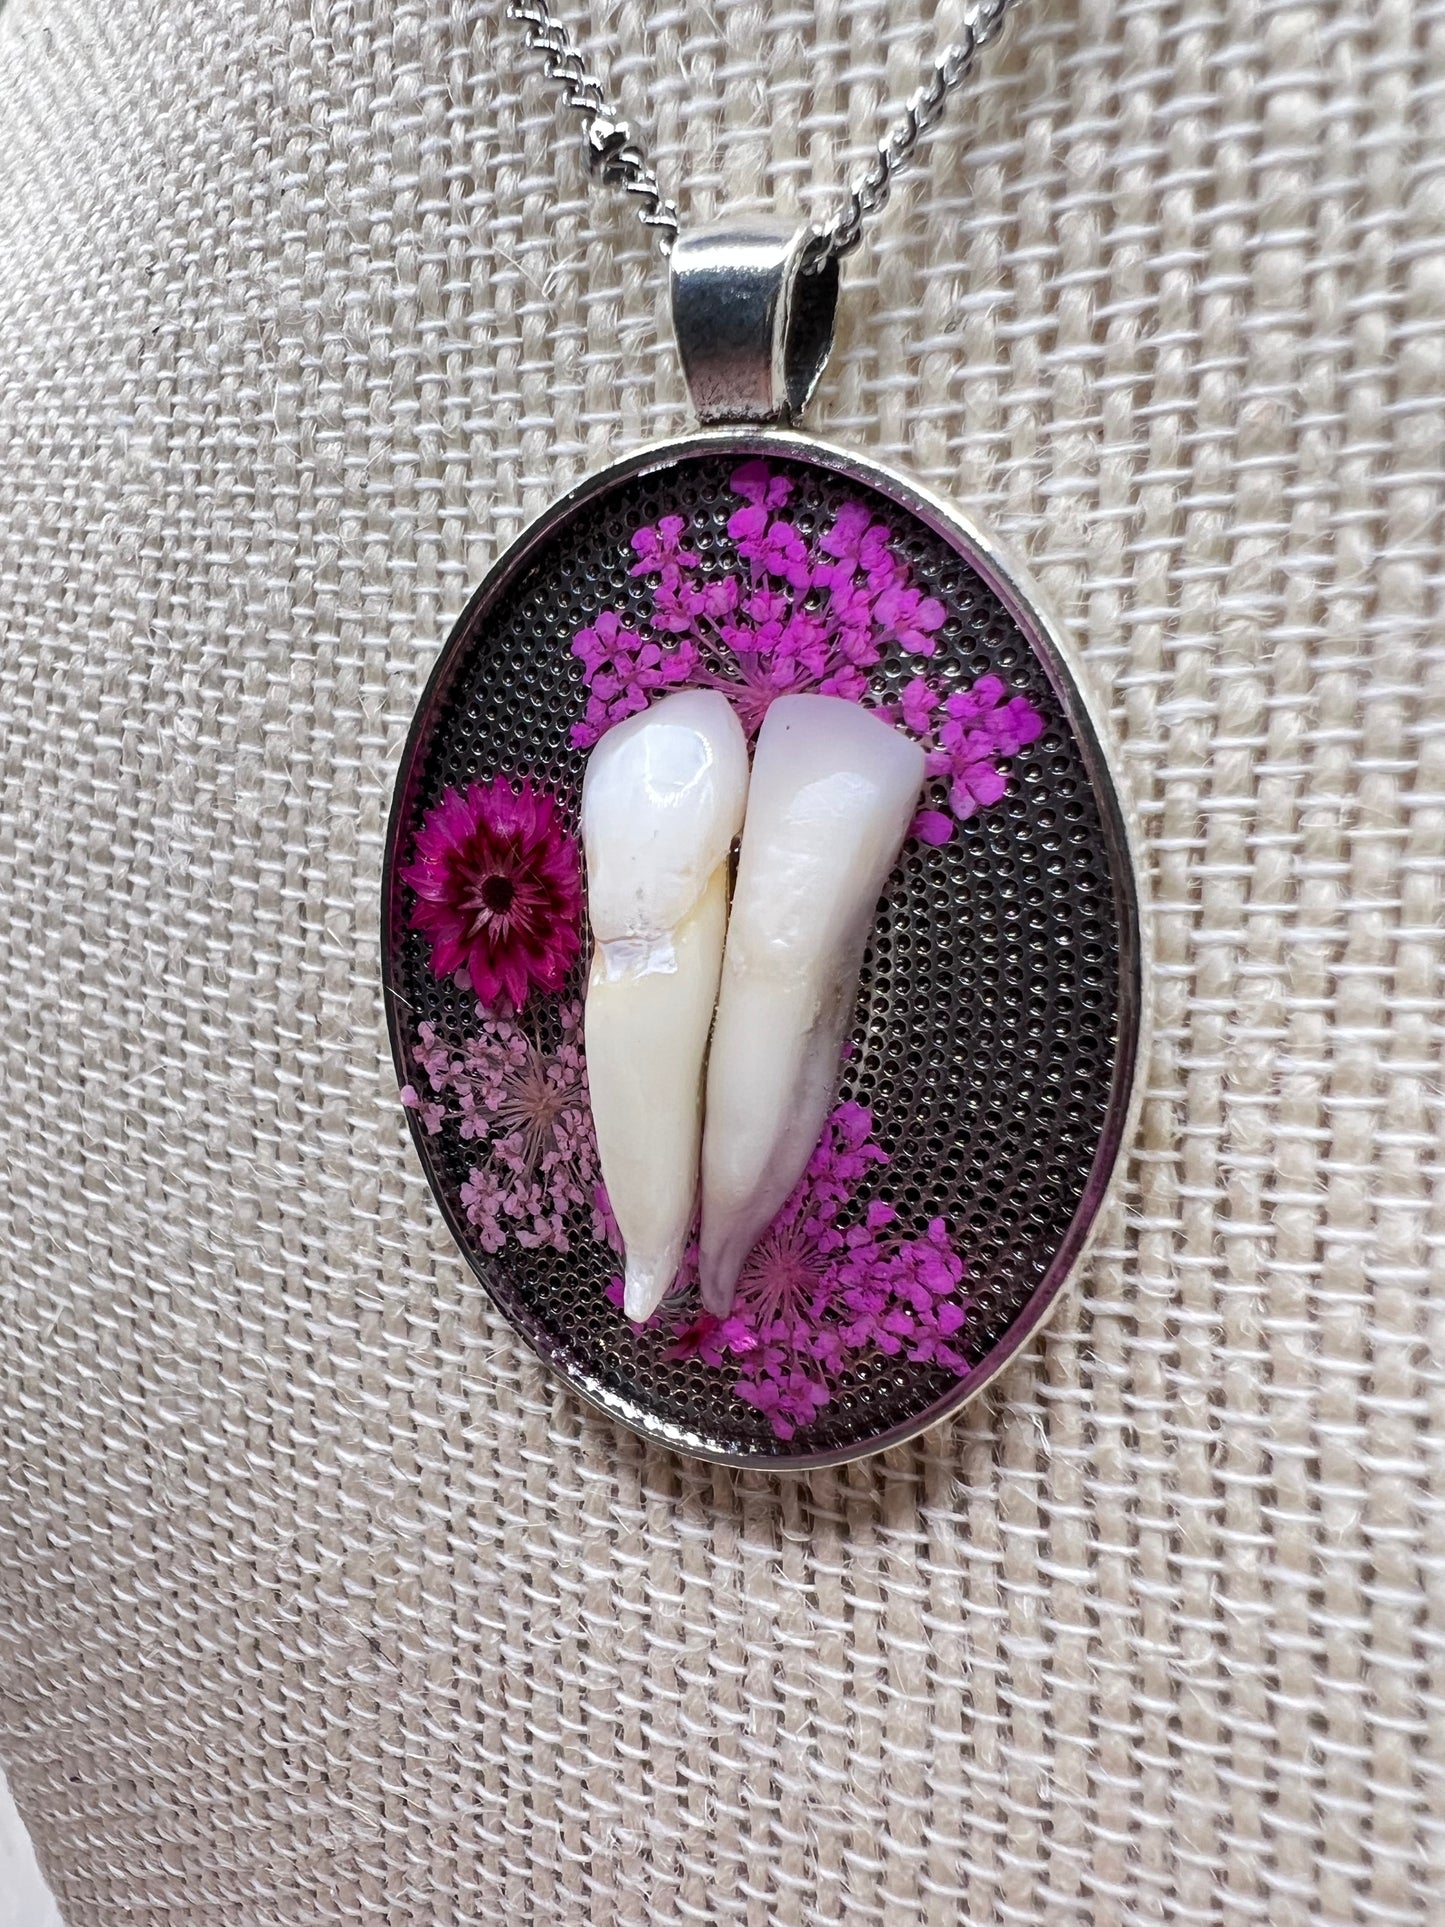 “The Lovers” Human Teeth Necklace